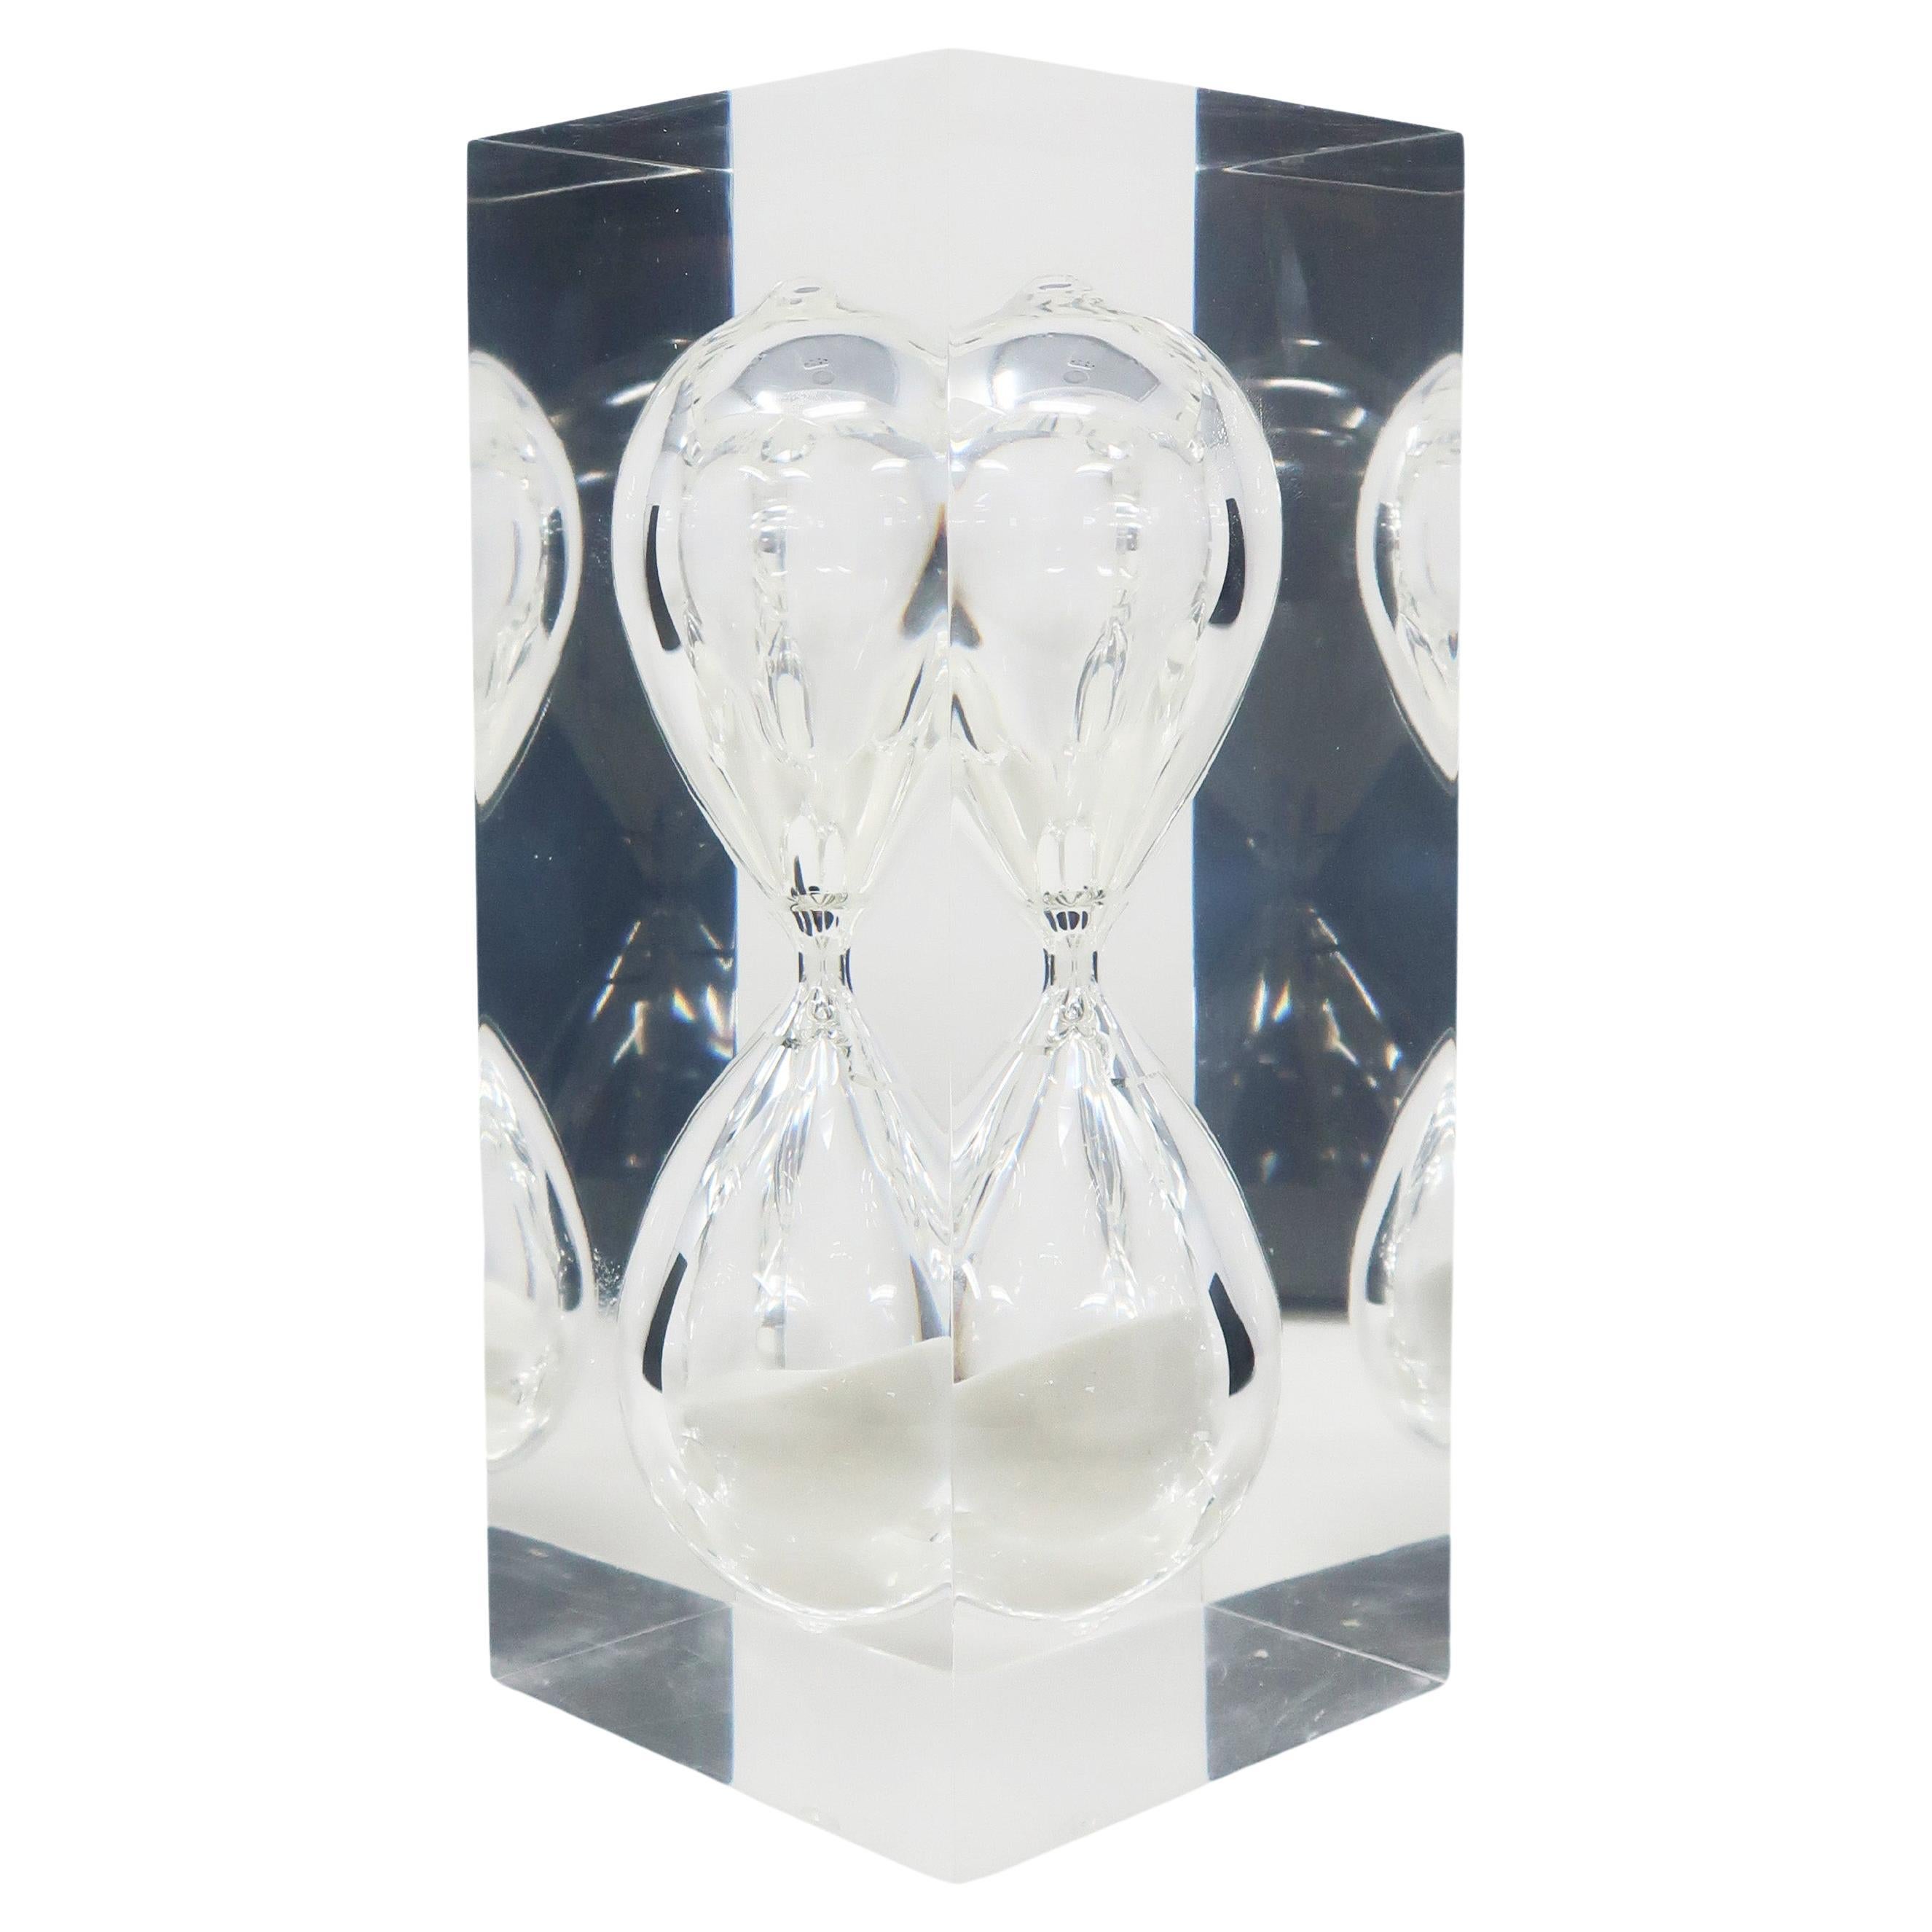 1970s, Floating Hourglass in Lucite Sculpture Attr. to Pierre Giraudon